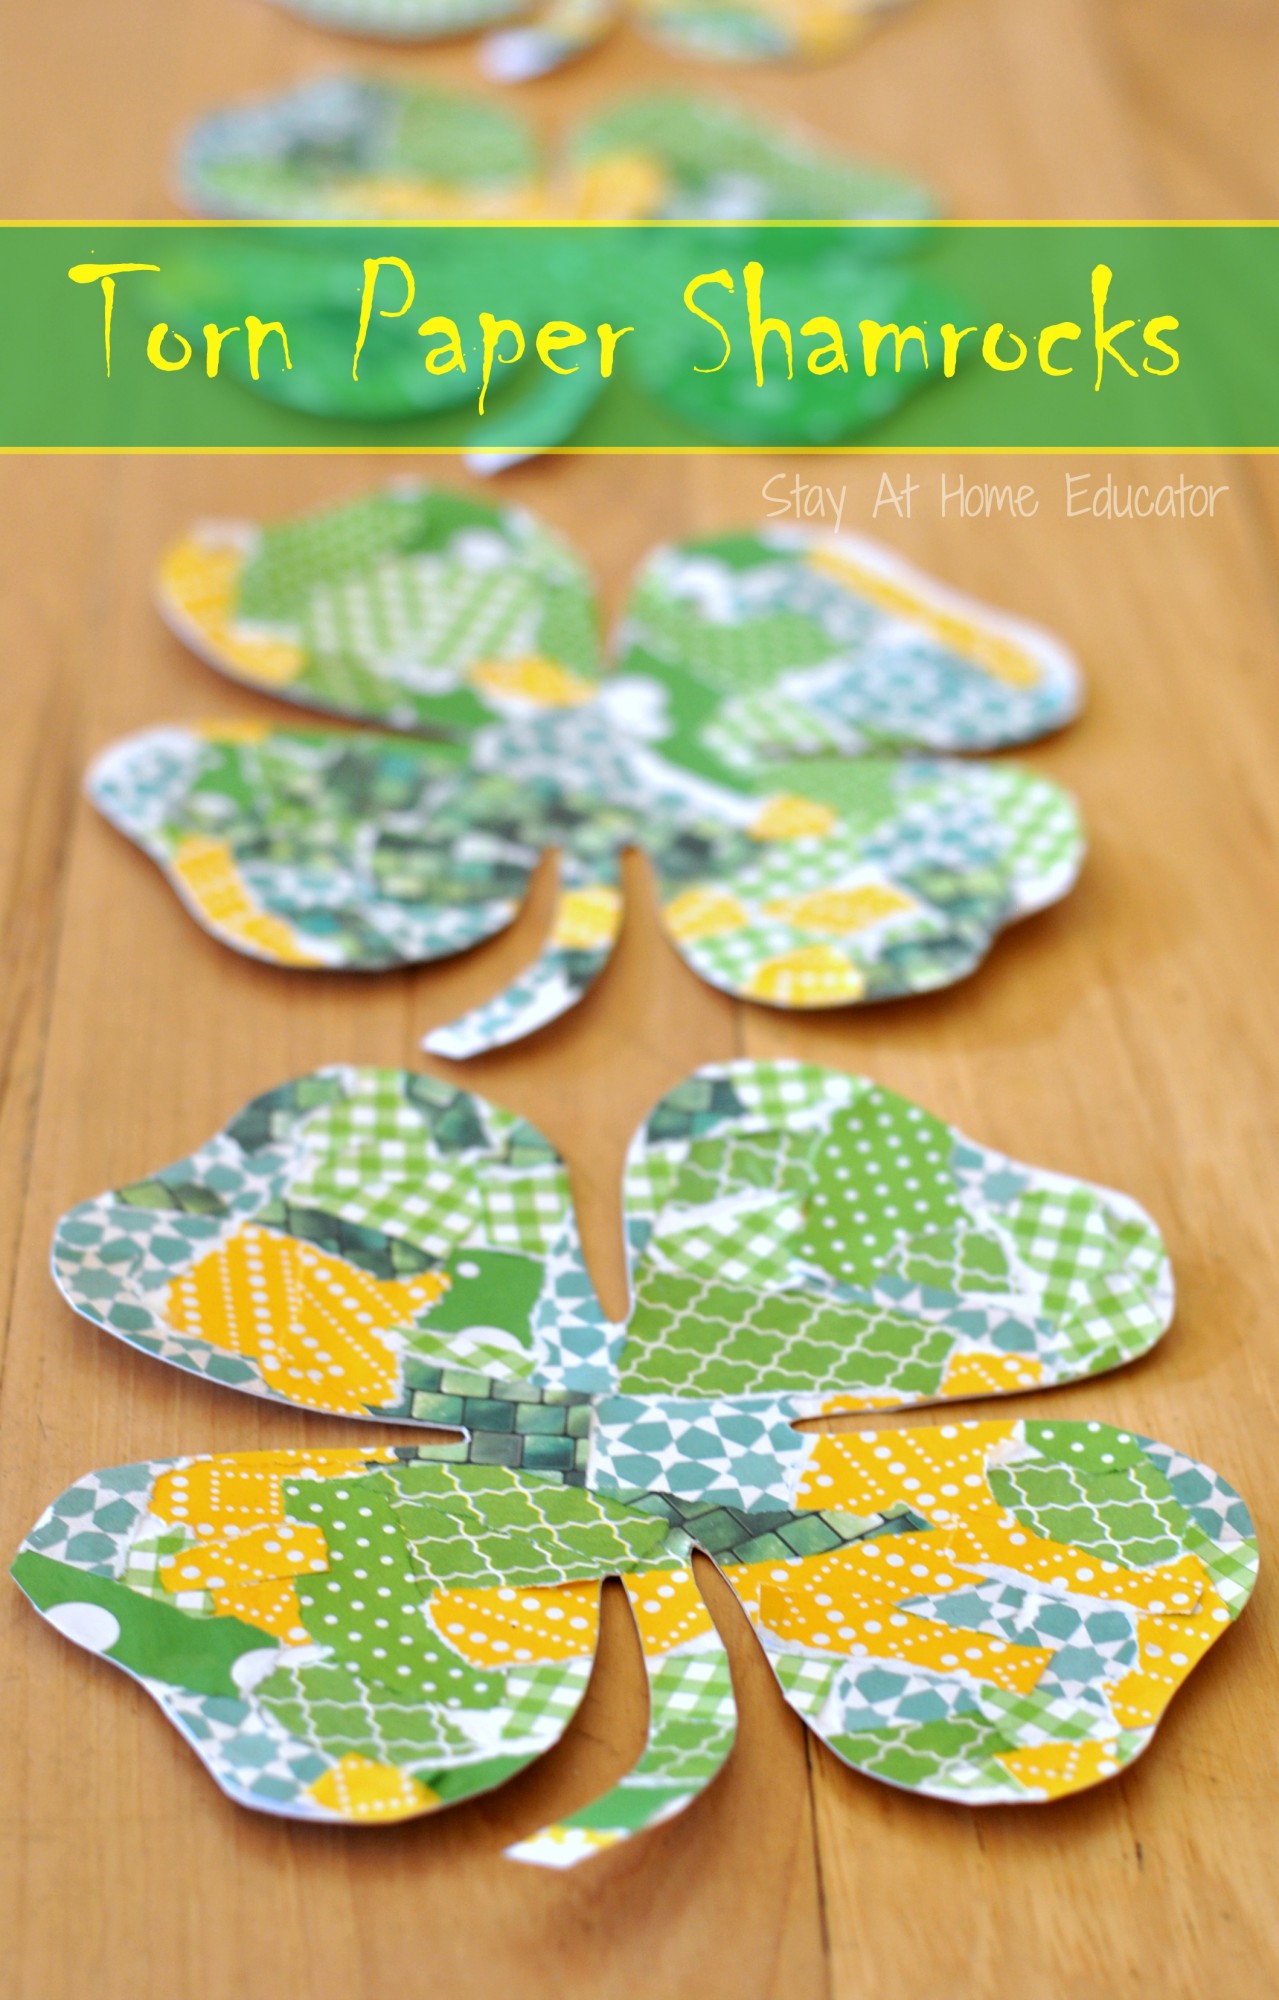 Torn paper shamrock St. Patrick's Day craft for preschoolers - Stay At Home Educator